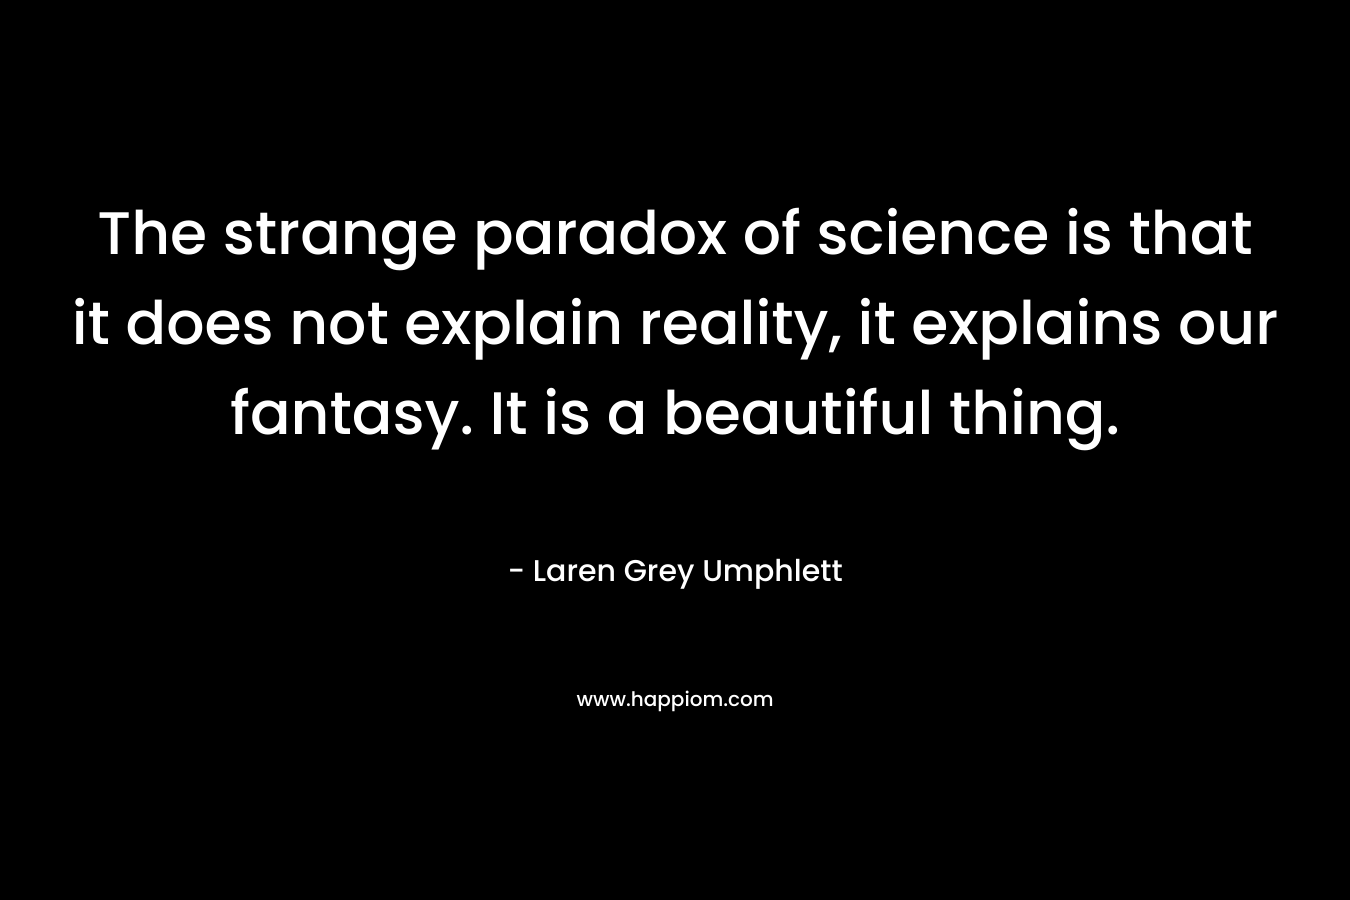 The strange paradox of science is that it does not explain reality, it explains our fantasy. It is a beautiful thing.